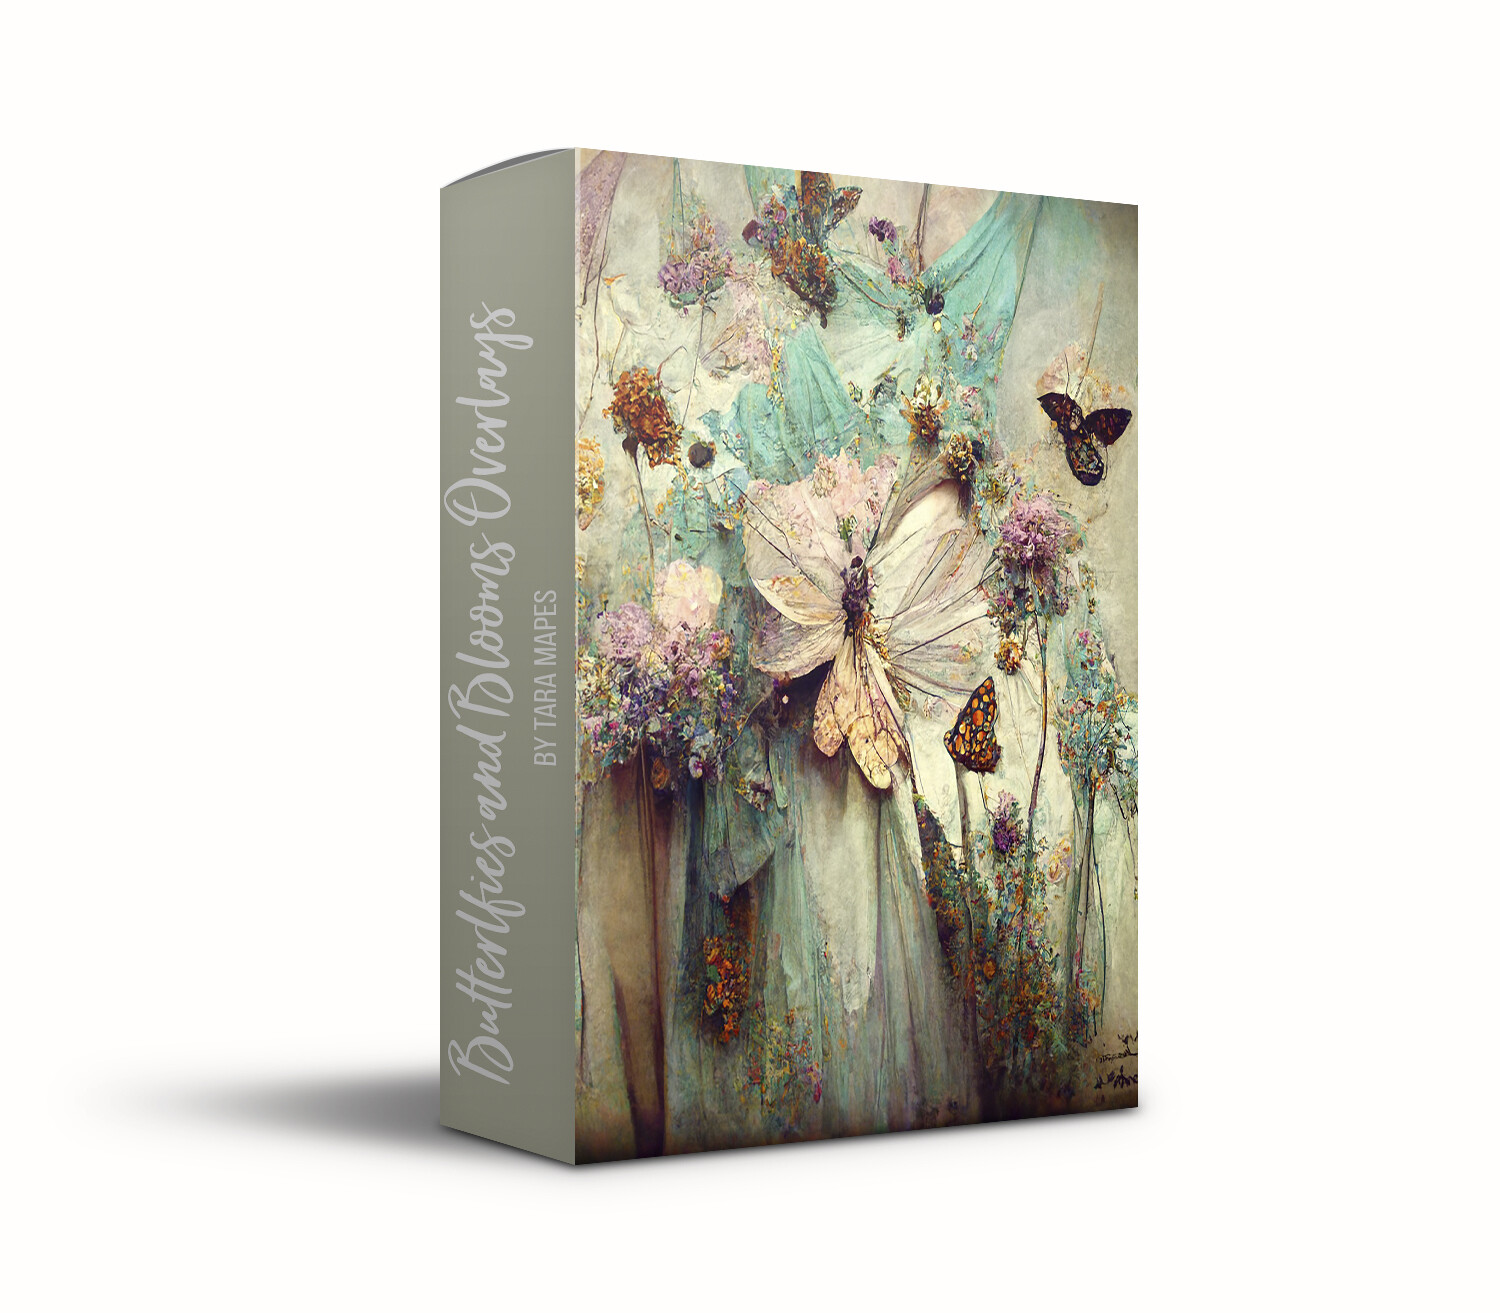 Vintage Butterflies and Flowers Texture Overlays - Floral Collection Fine Art Texture Overlays - 12 Digital Painted Floral Textures - Photoshop Overlays by Tara Mapes